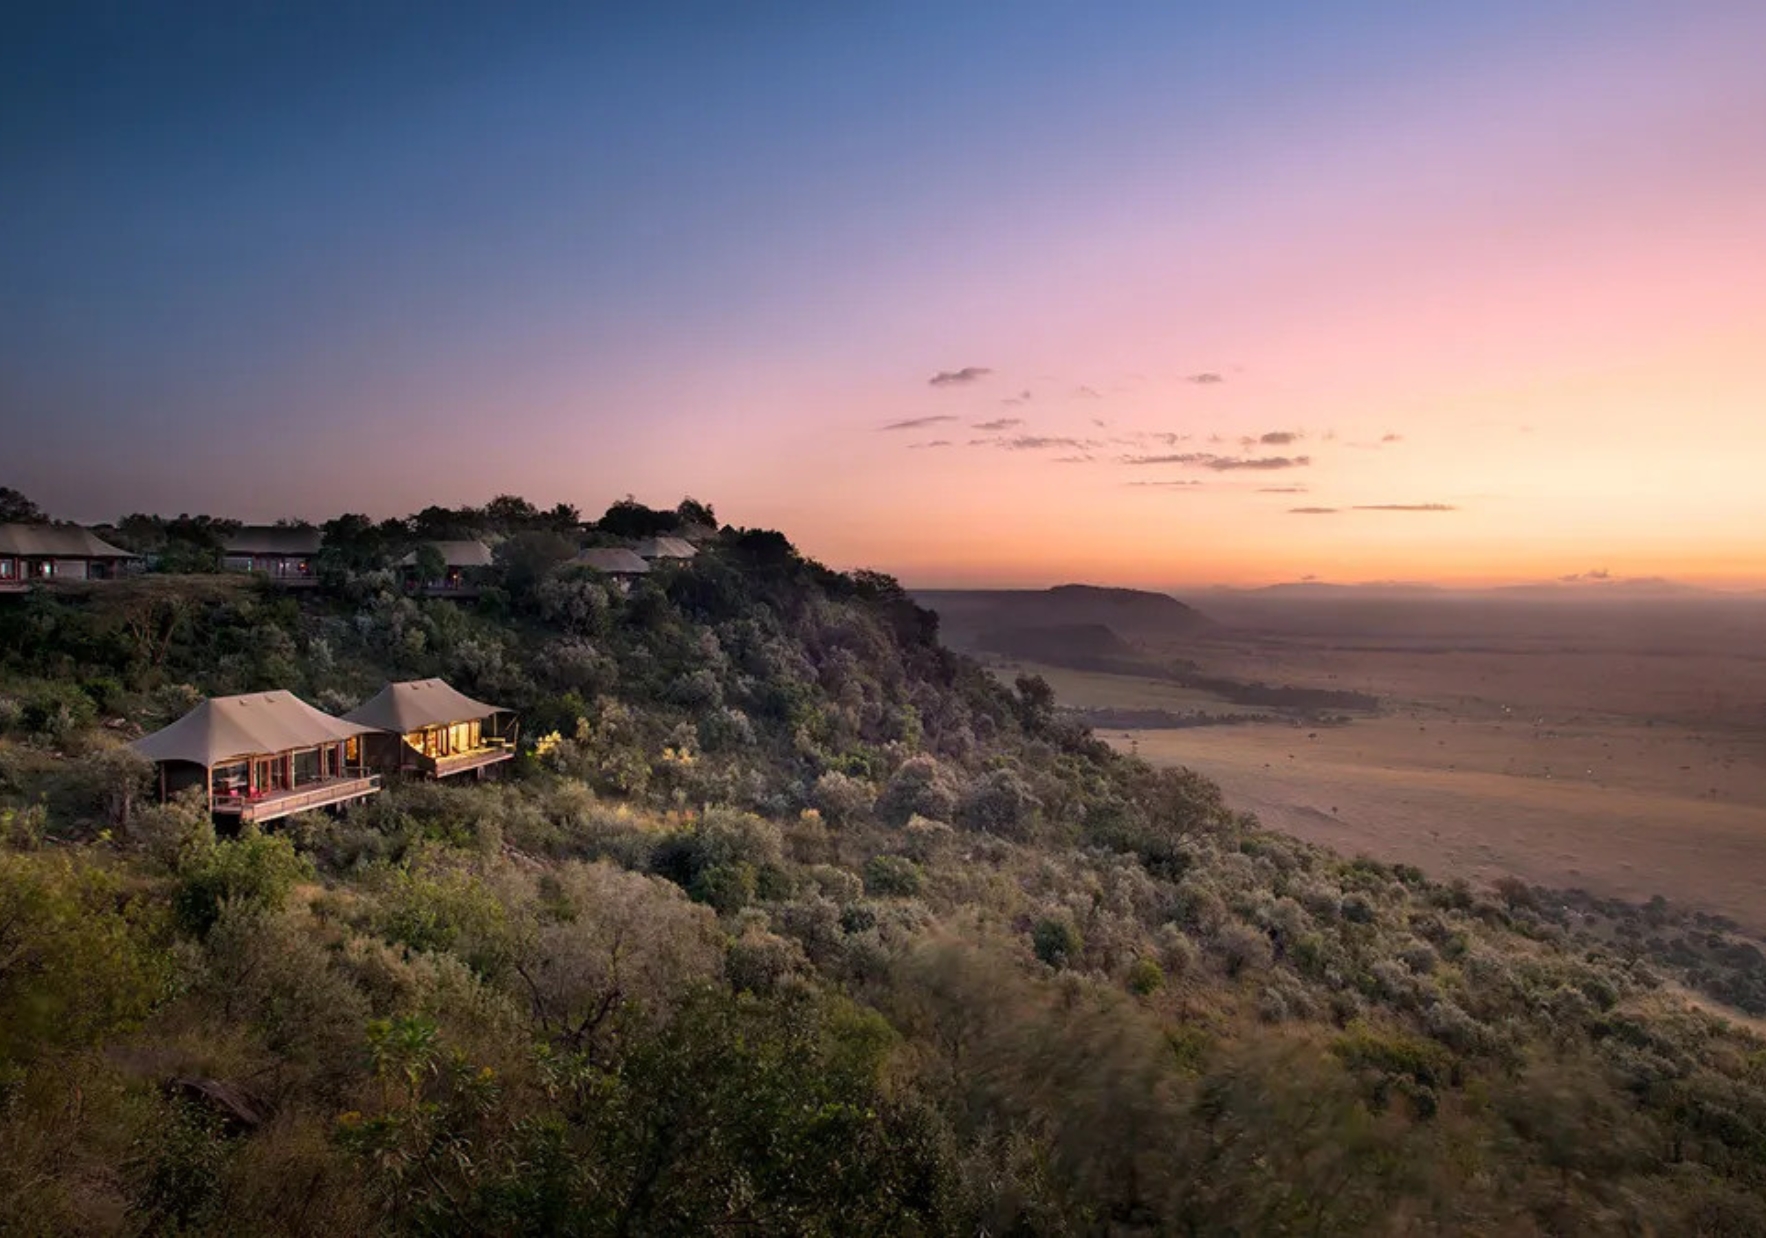 Image of the 10-room lodge on a clifftop overlooking Mount Kilimanjaro